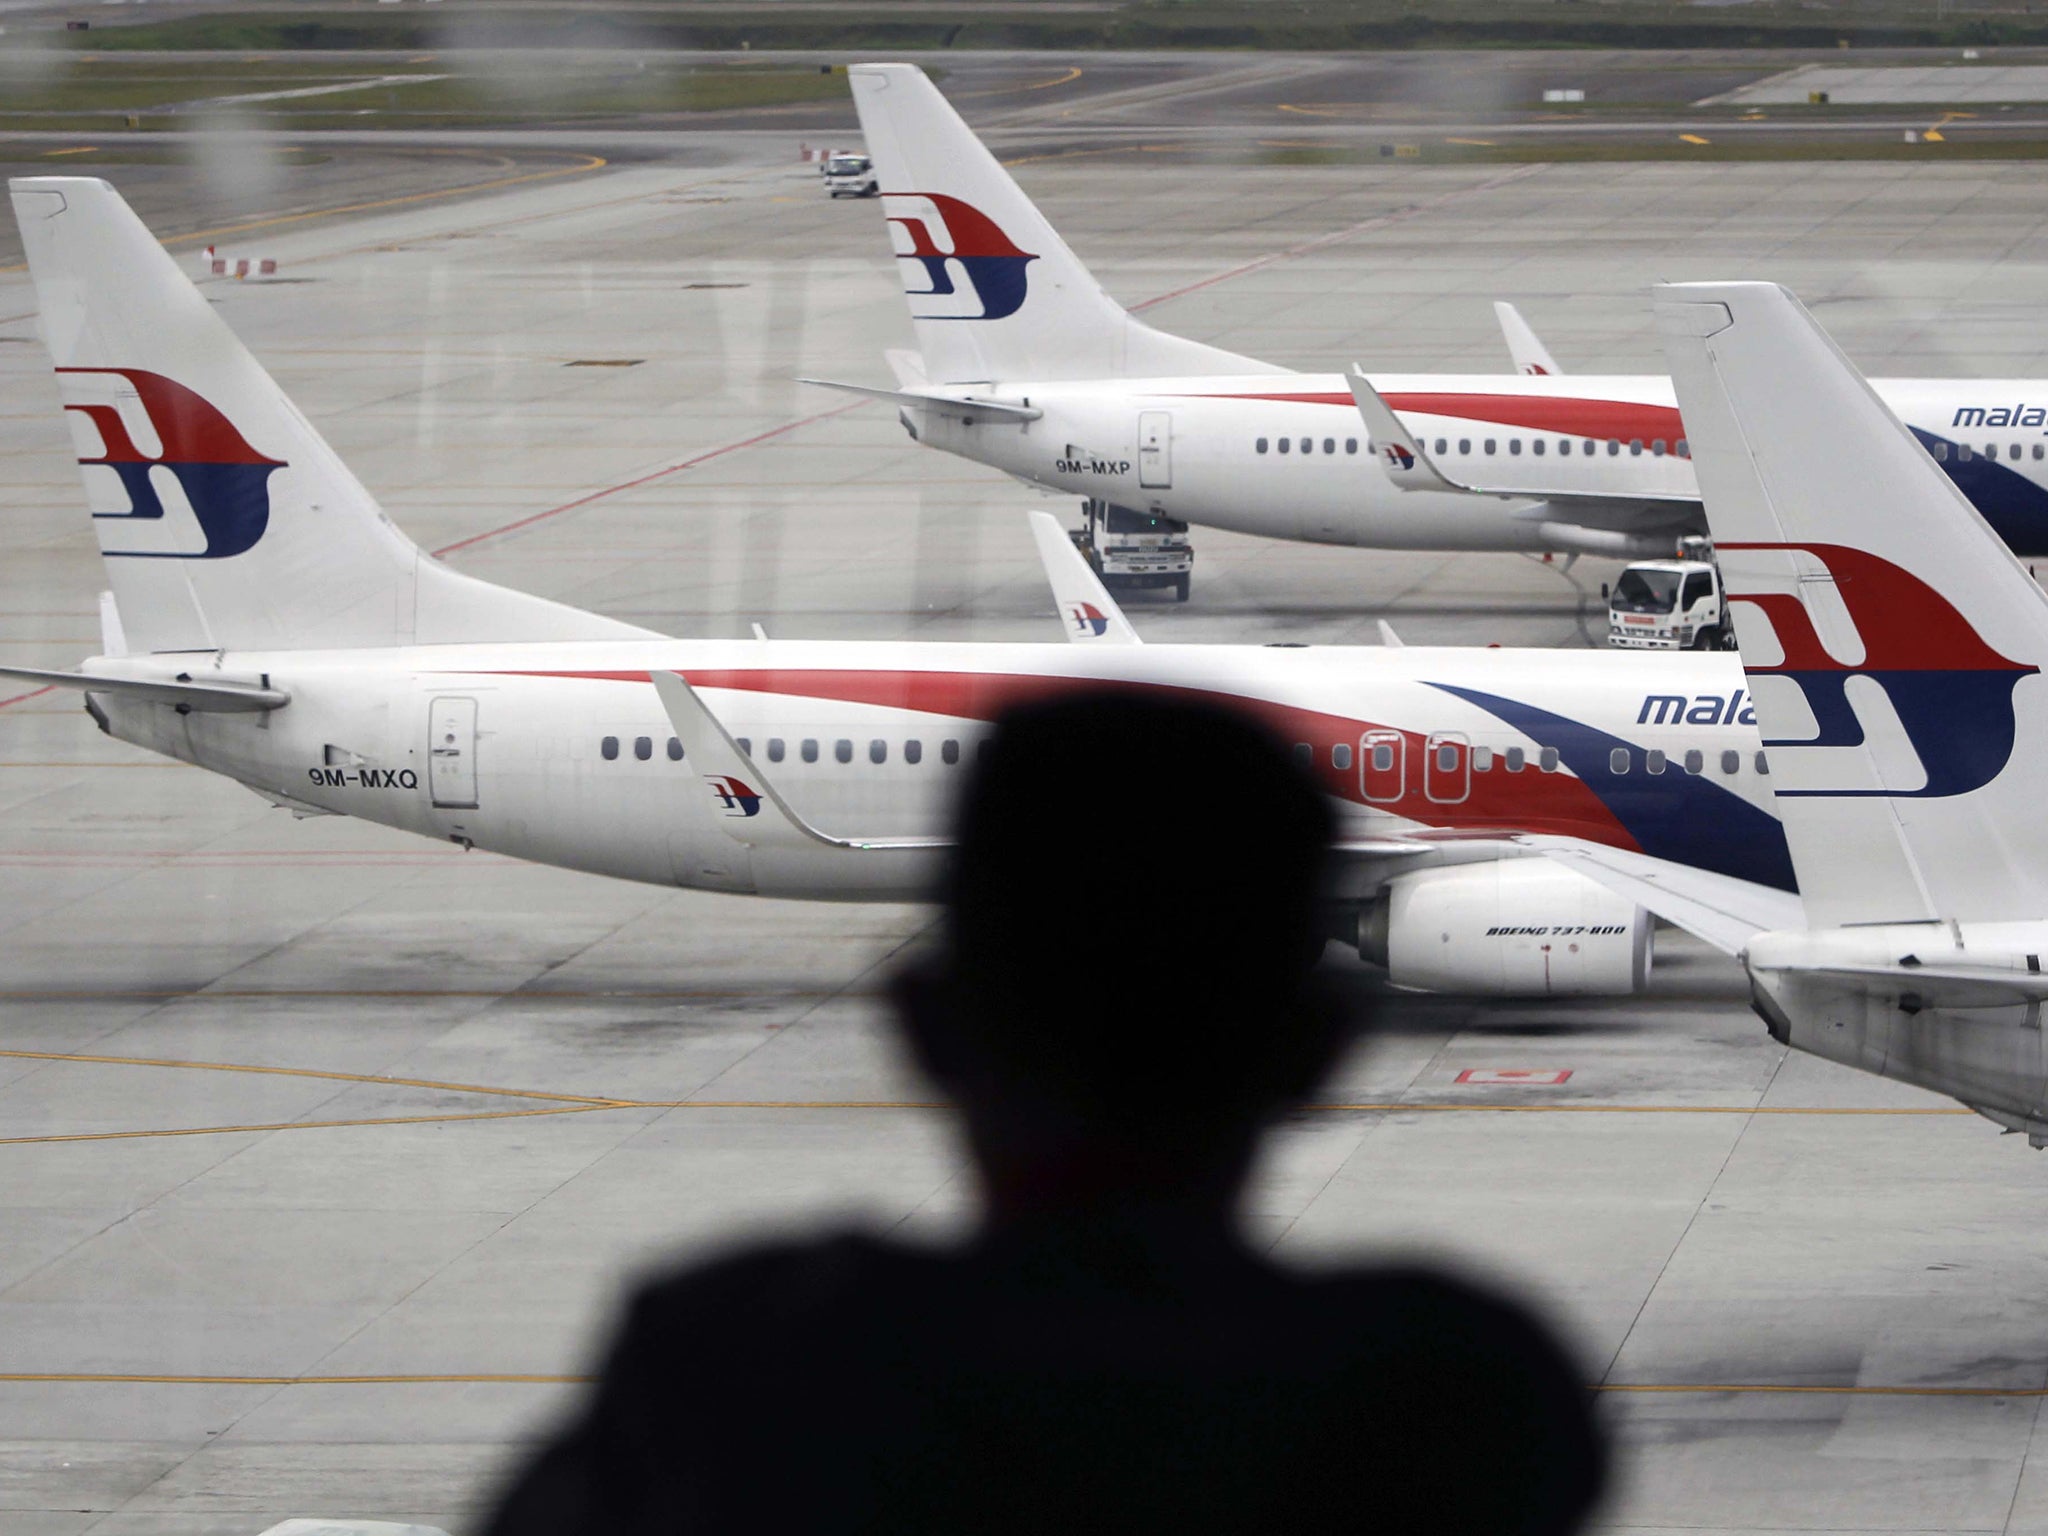 Malaysia Airlines chief executive has said the company is technically bankrupt after two air disasters sped its long decline